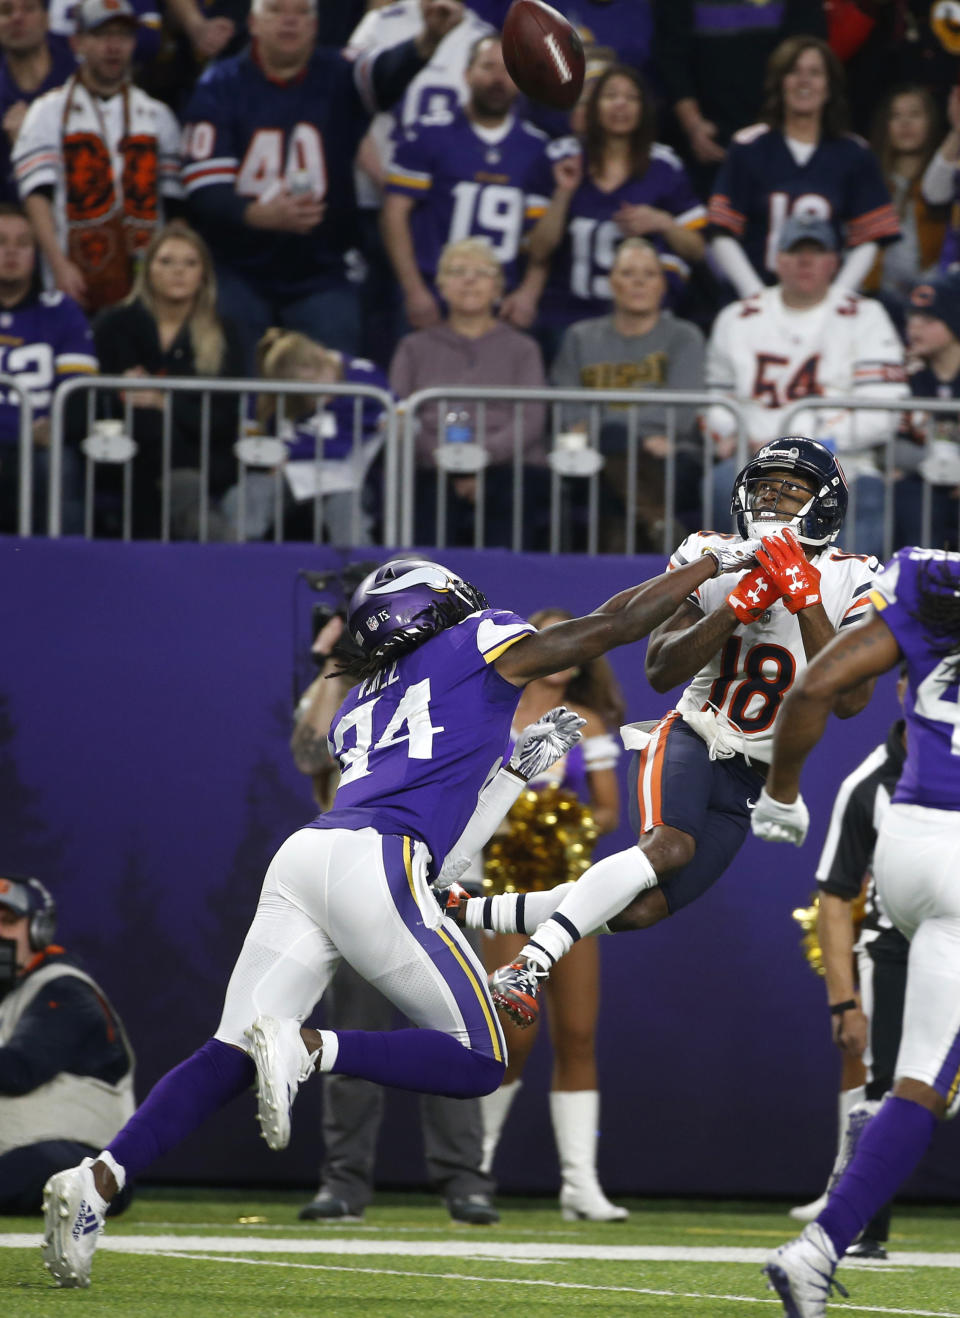 Chicago Bears wide receiver Taylor Gabriel (18) catches a pass over Minnesota Vikings defensive back Holton Hill (24) during the first half of an NFL football game, Sunday, Dec. 30, 2018, in Minneapolis. (AP Photo/Bruce Kluckhohn)